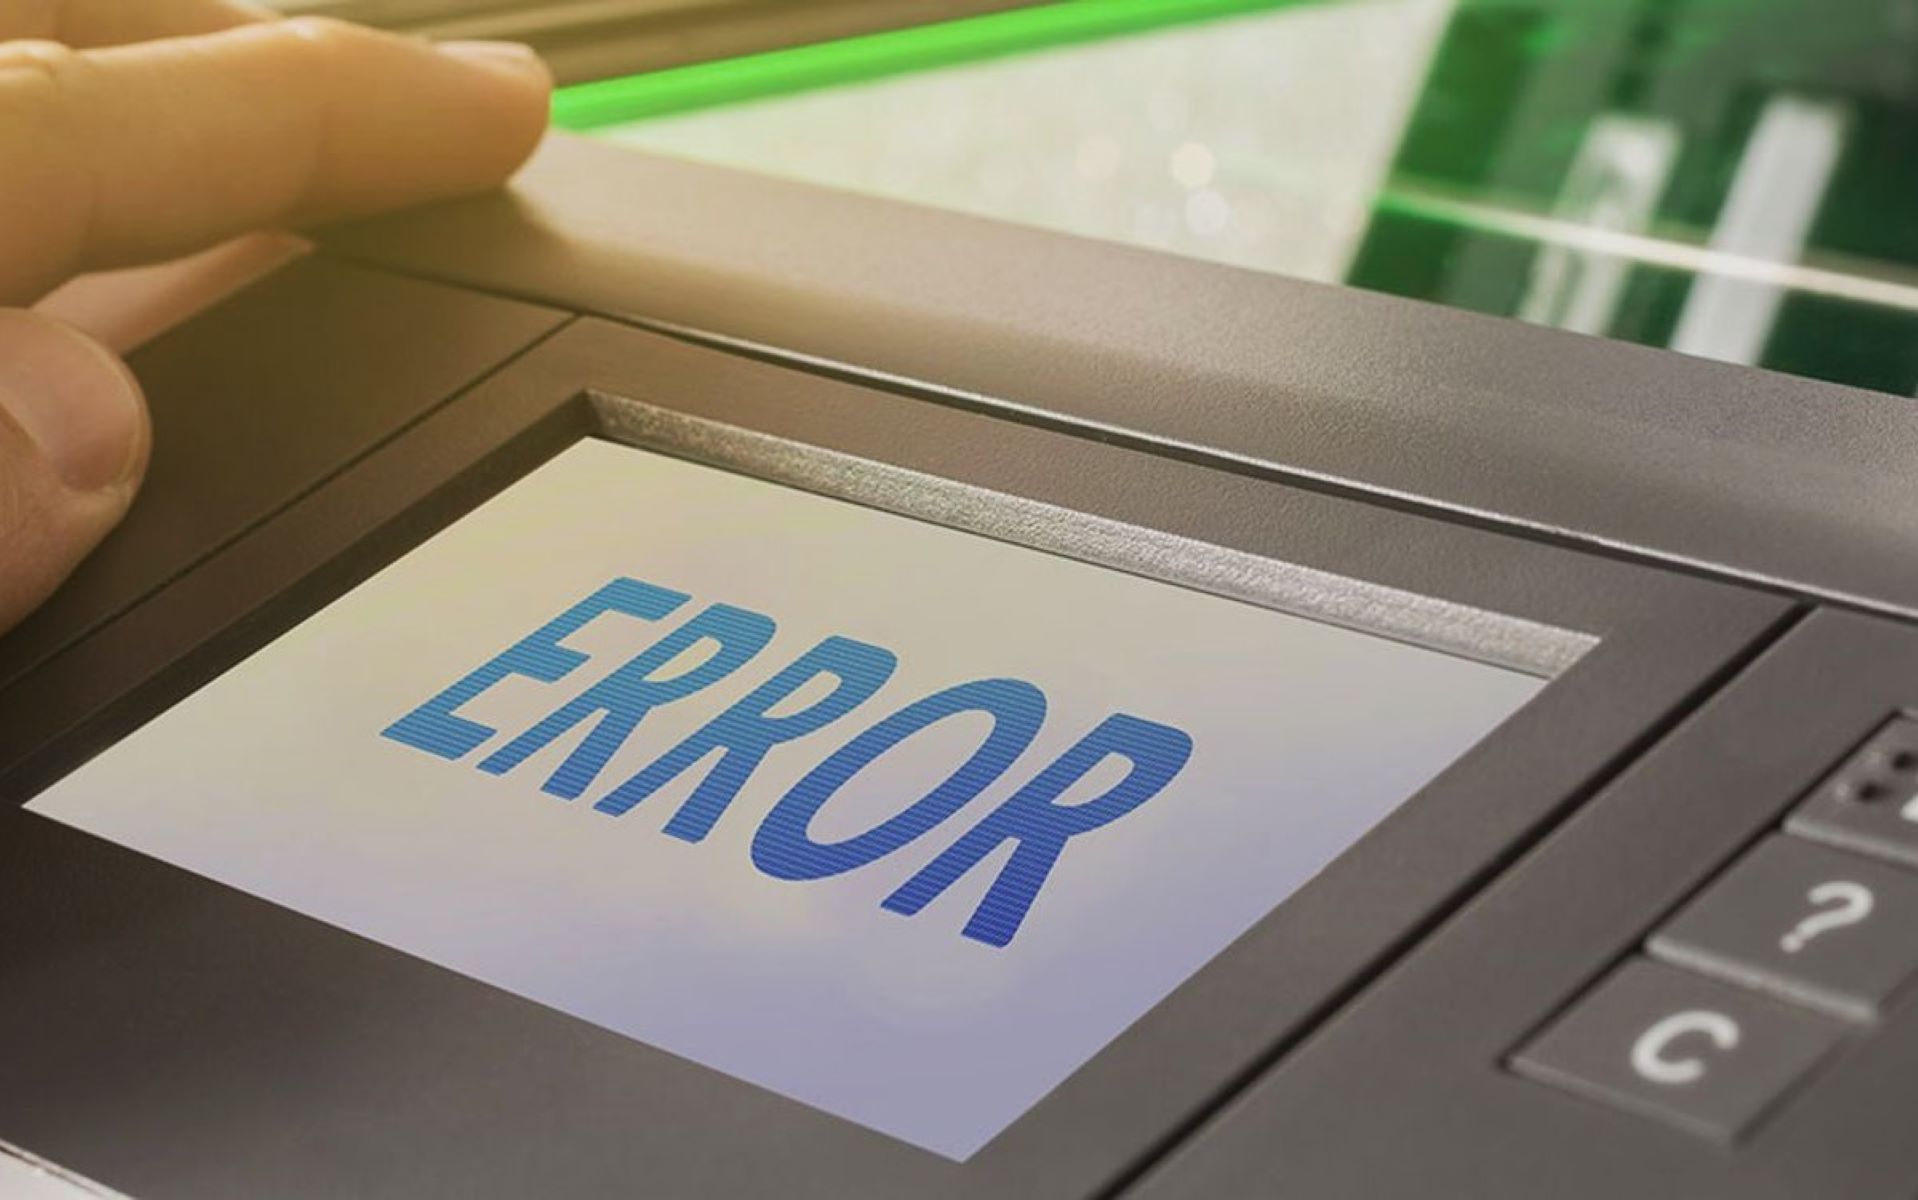 How Do I Clear The Error Code On My Canon Printer?